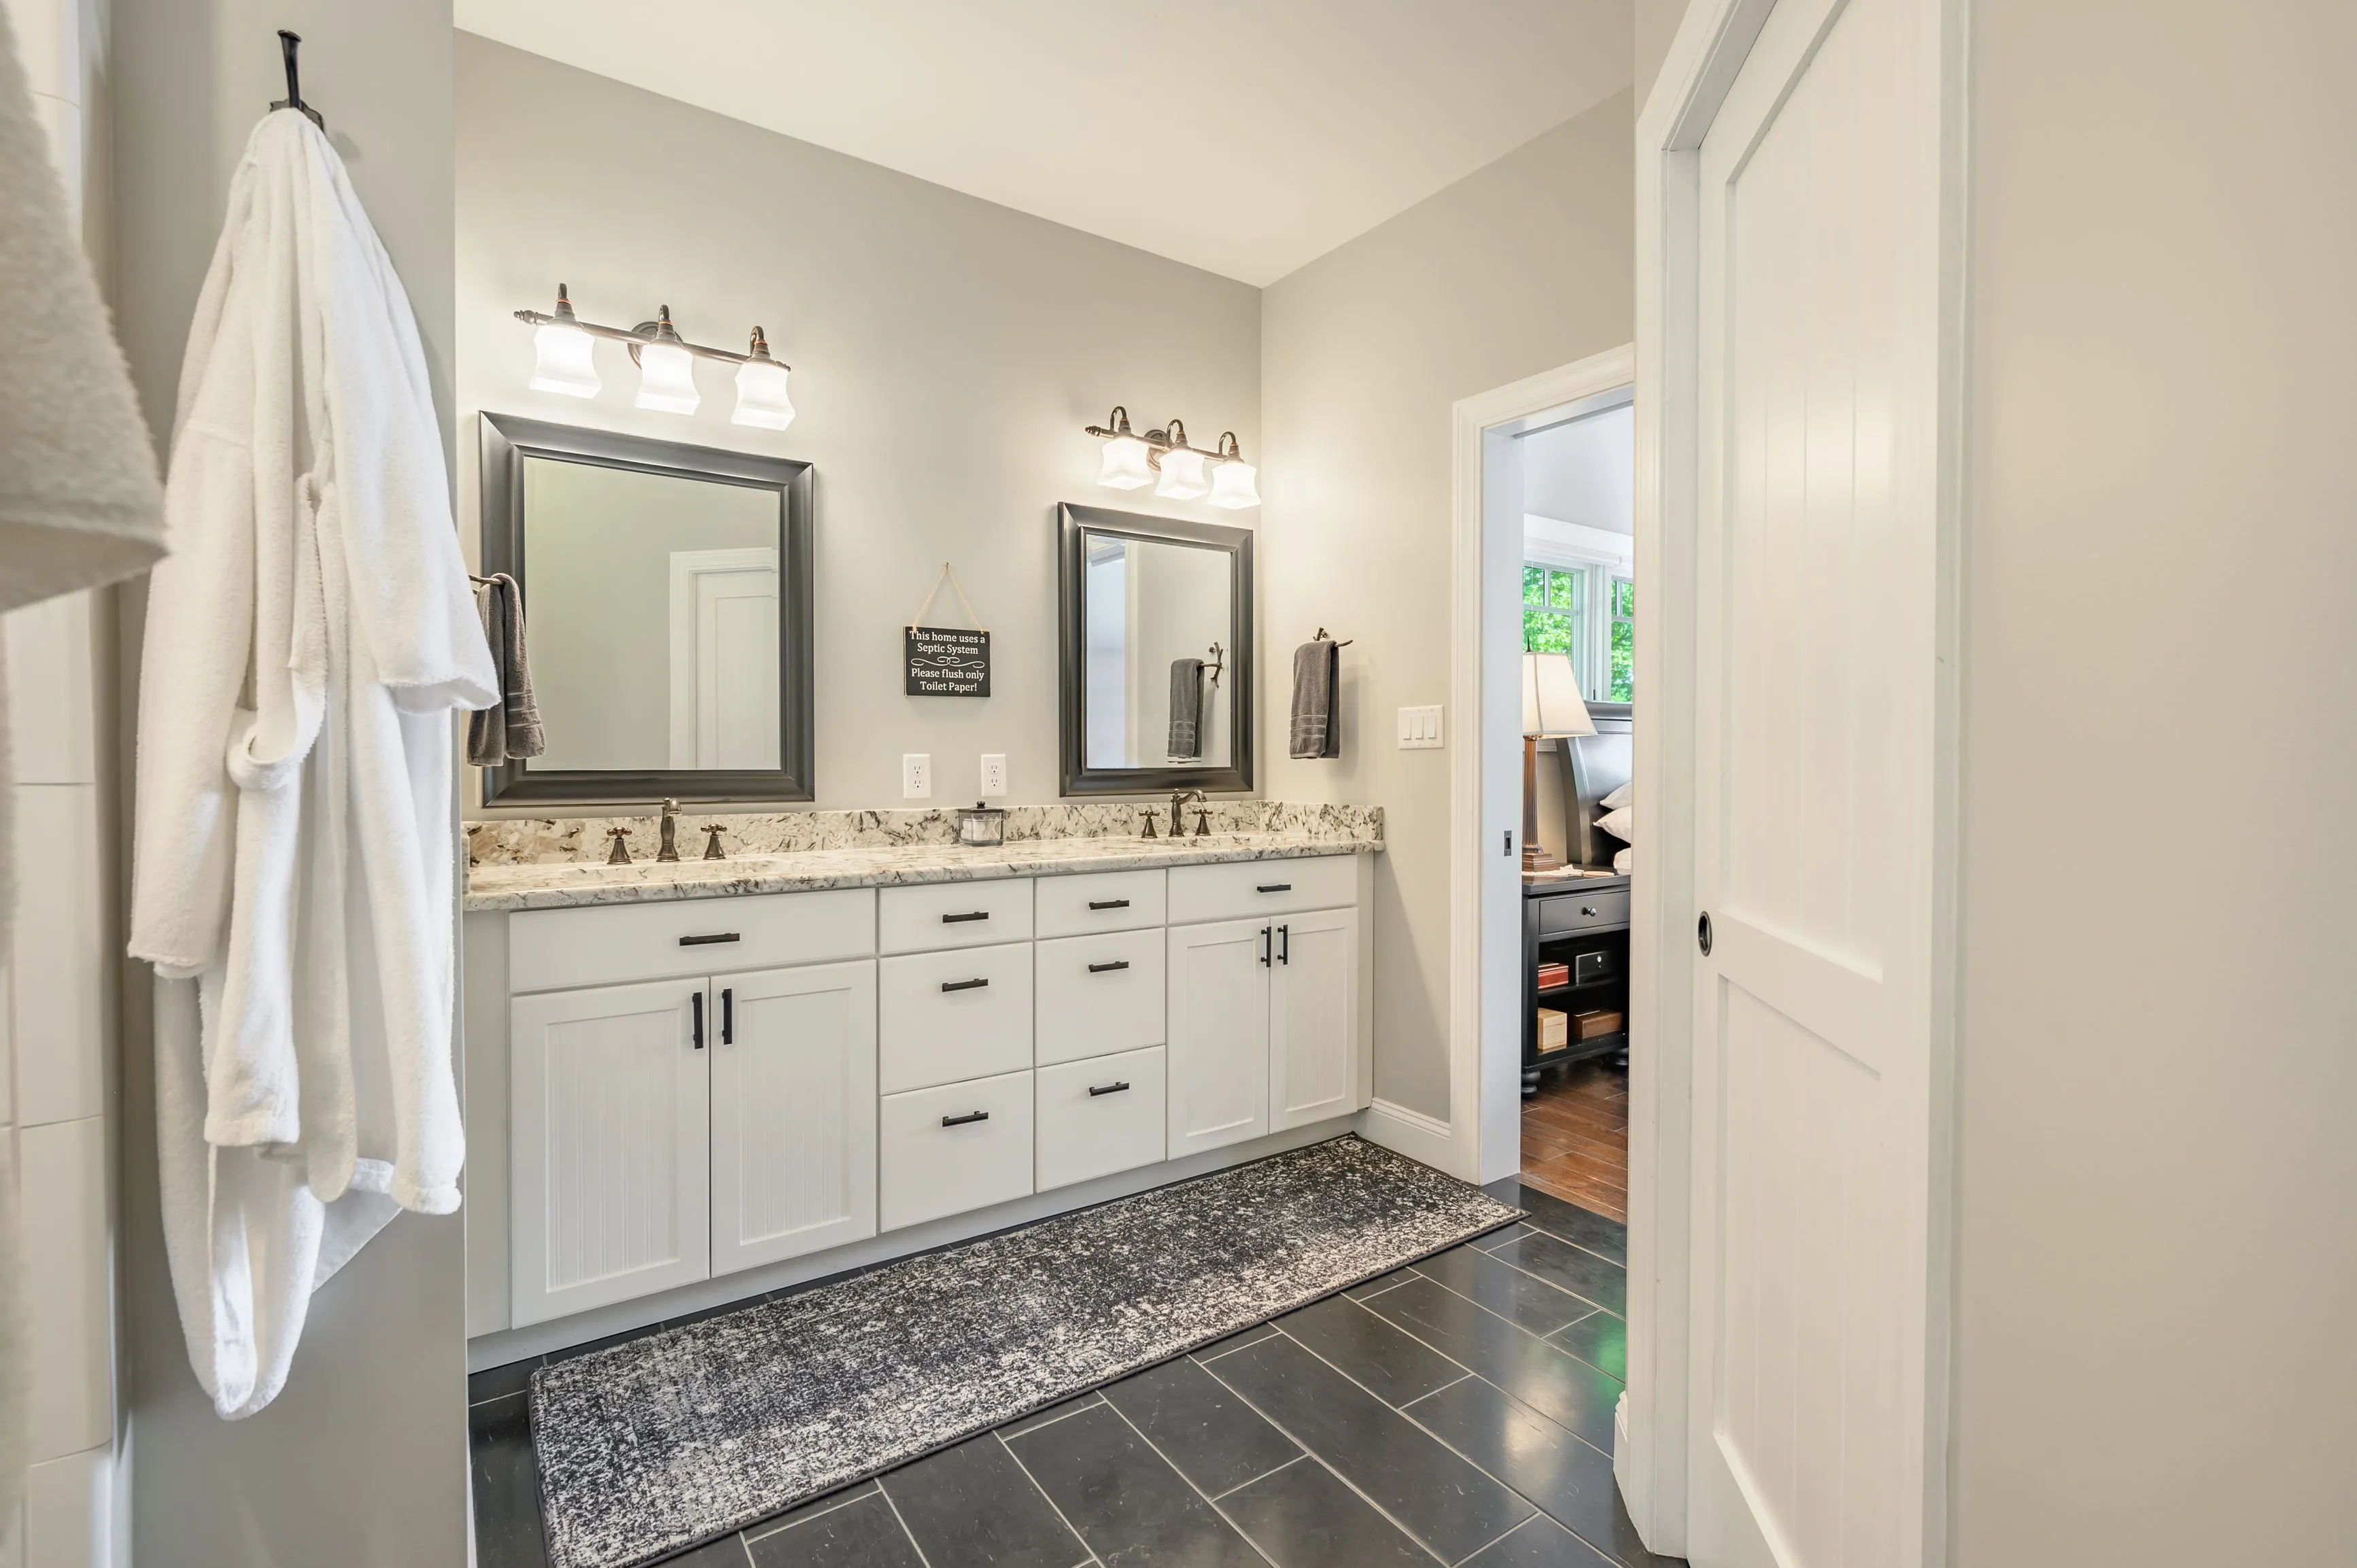 A clean and well-lit modern bathroom with double vanity sinks, large mirrors, and a patterned tile floor.